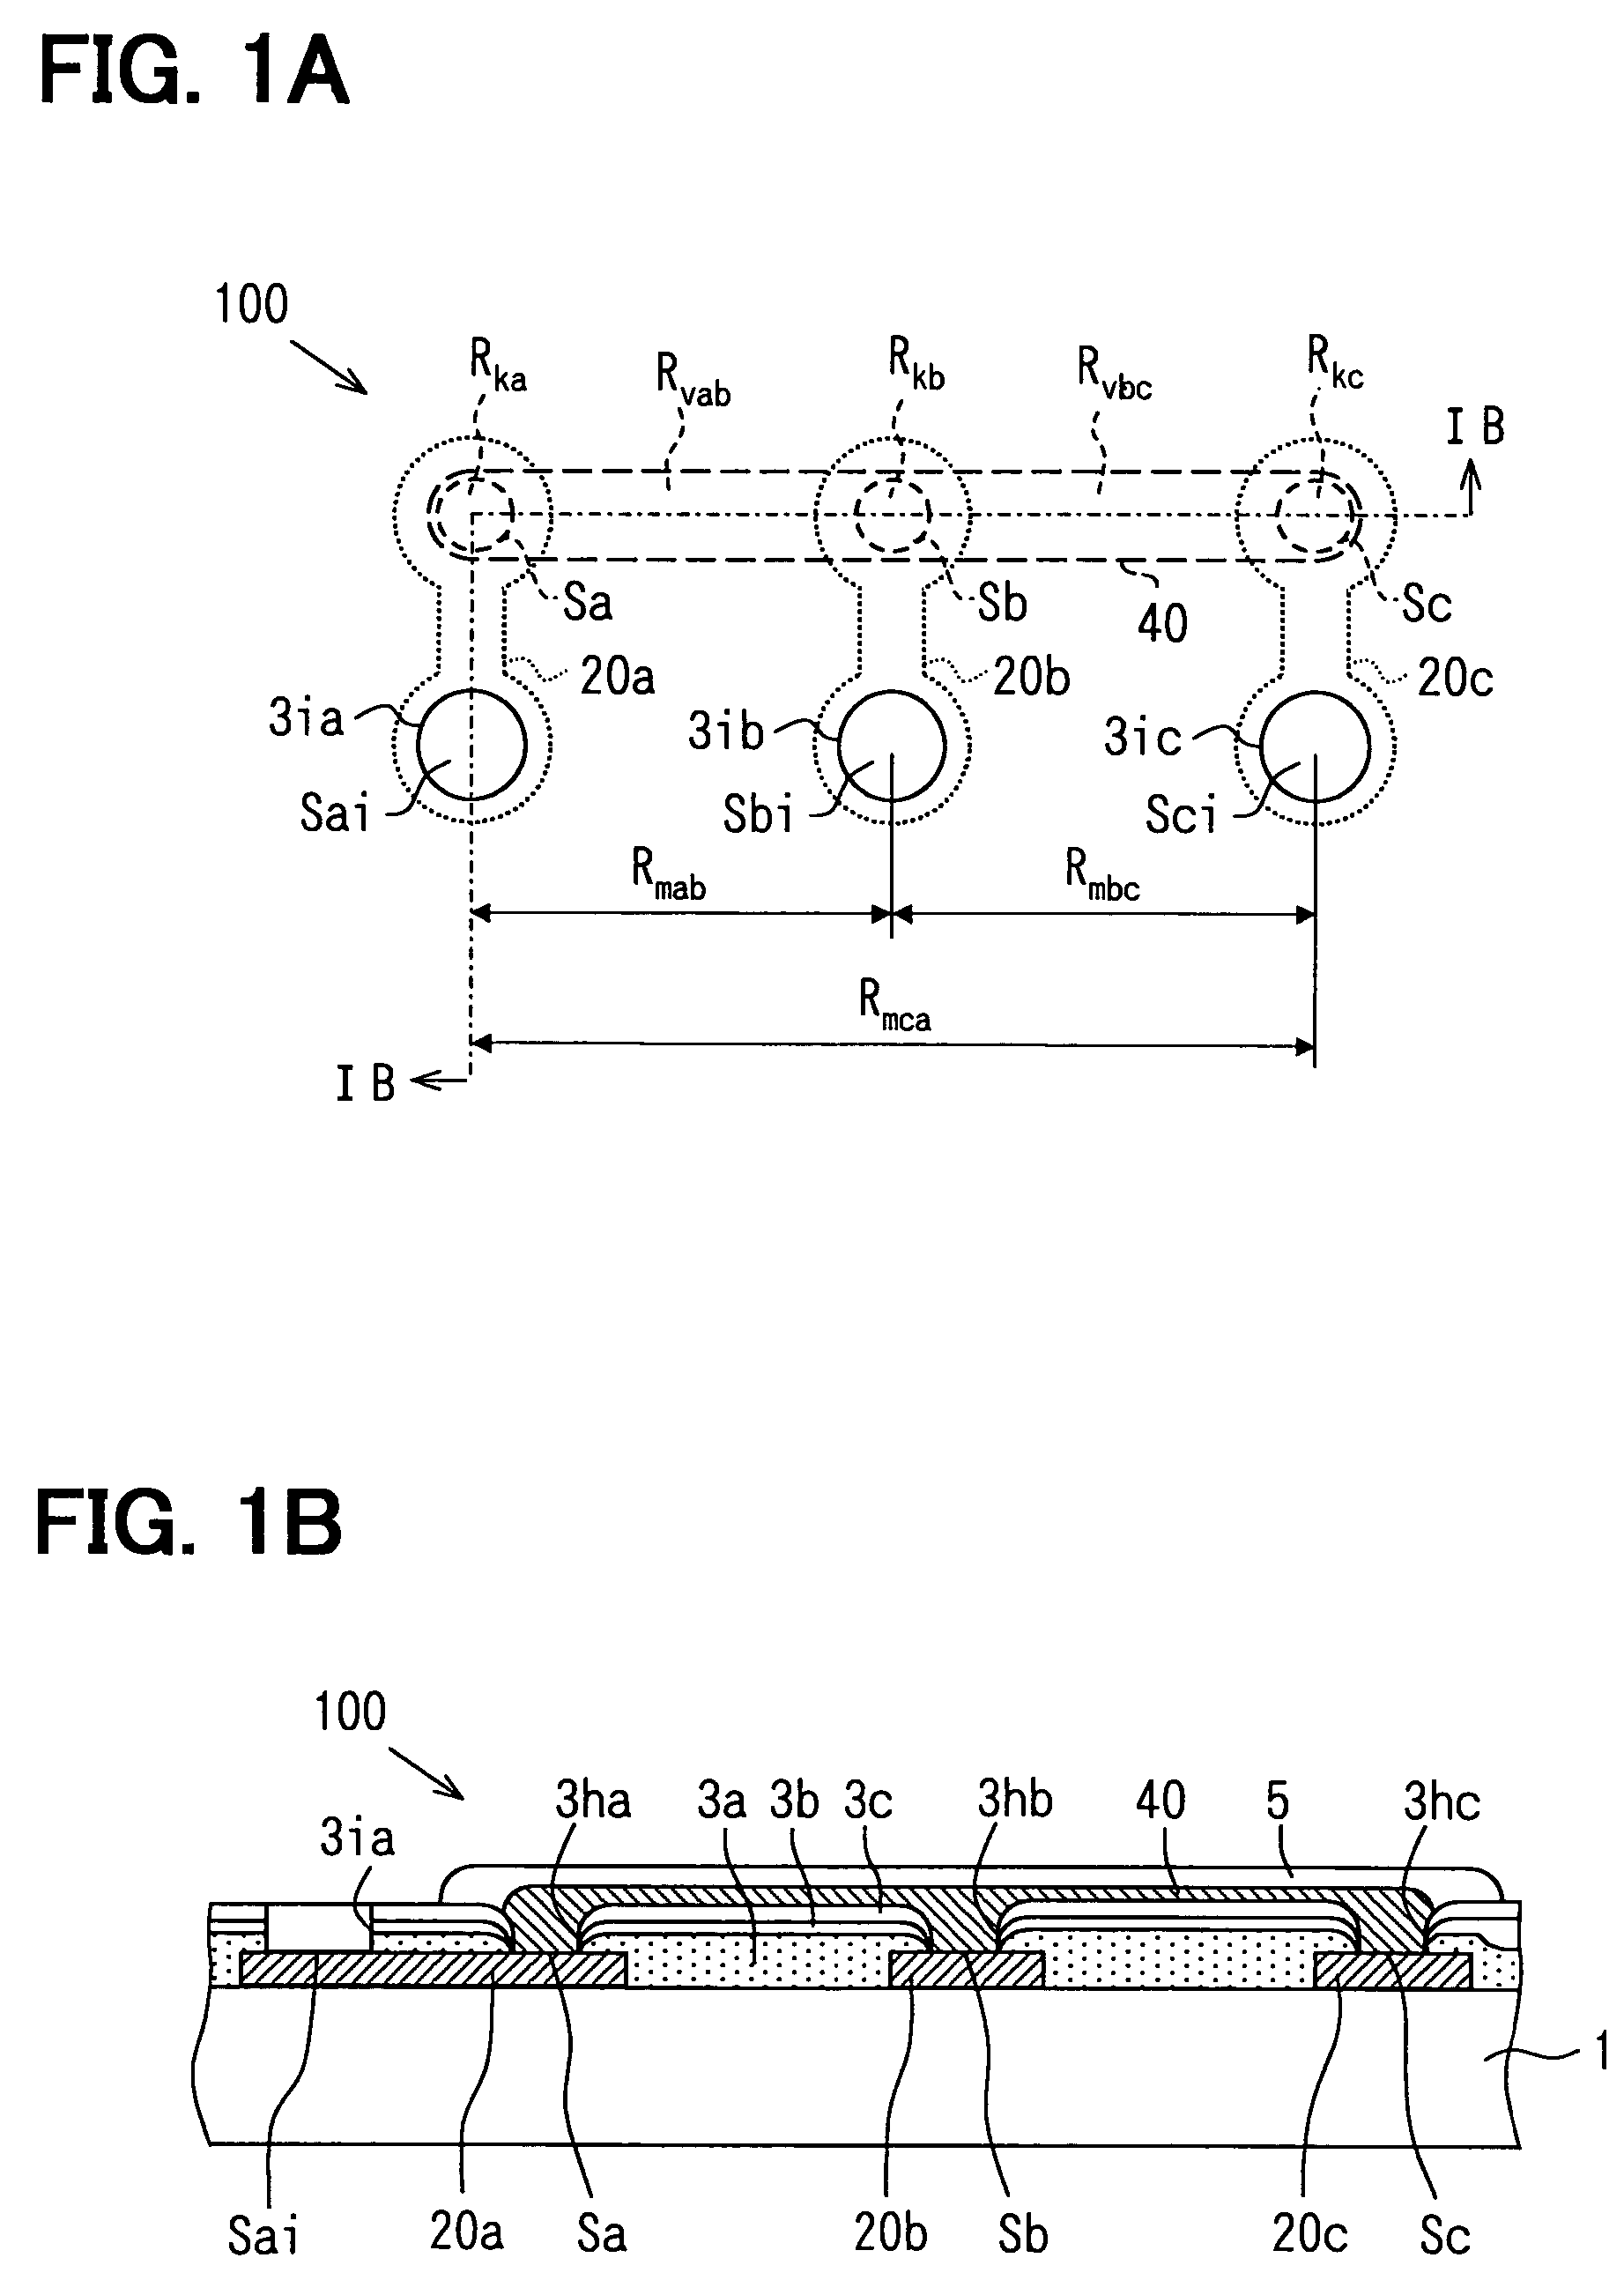 Circuit board having test coupon and method for evaluating the circuit board